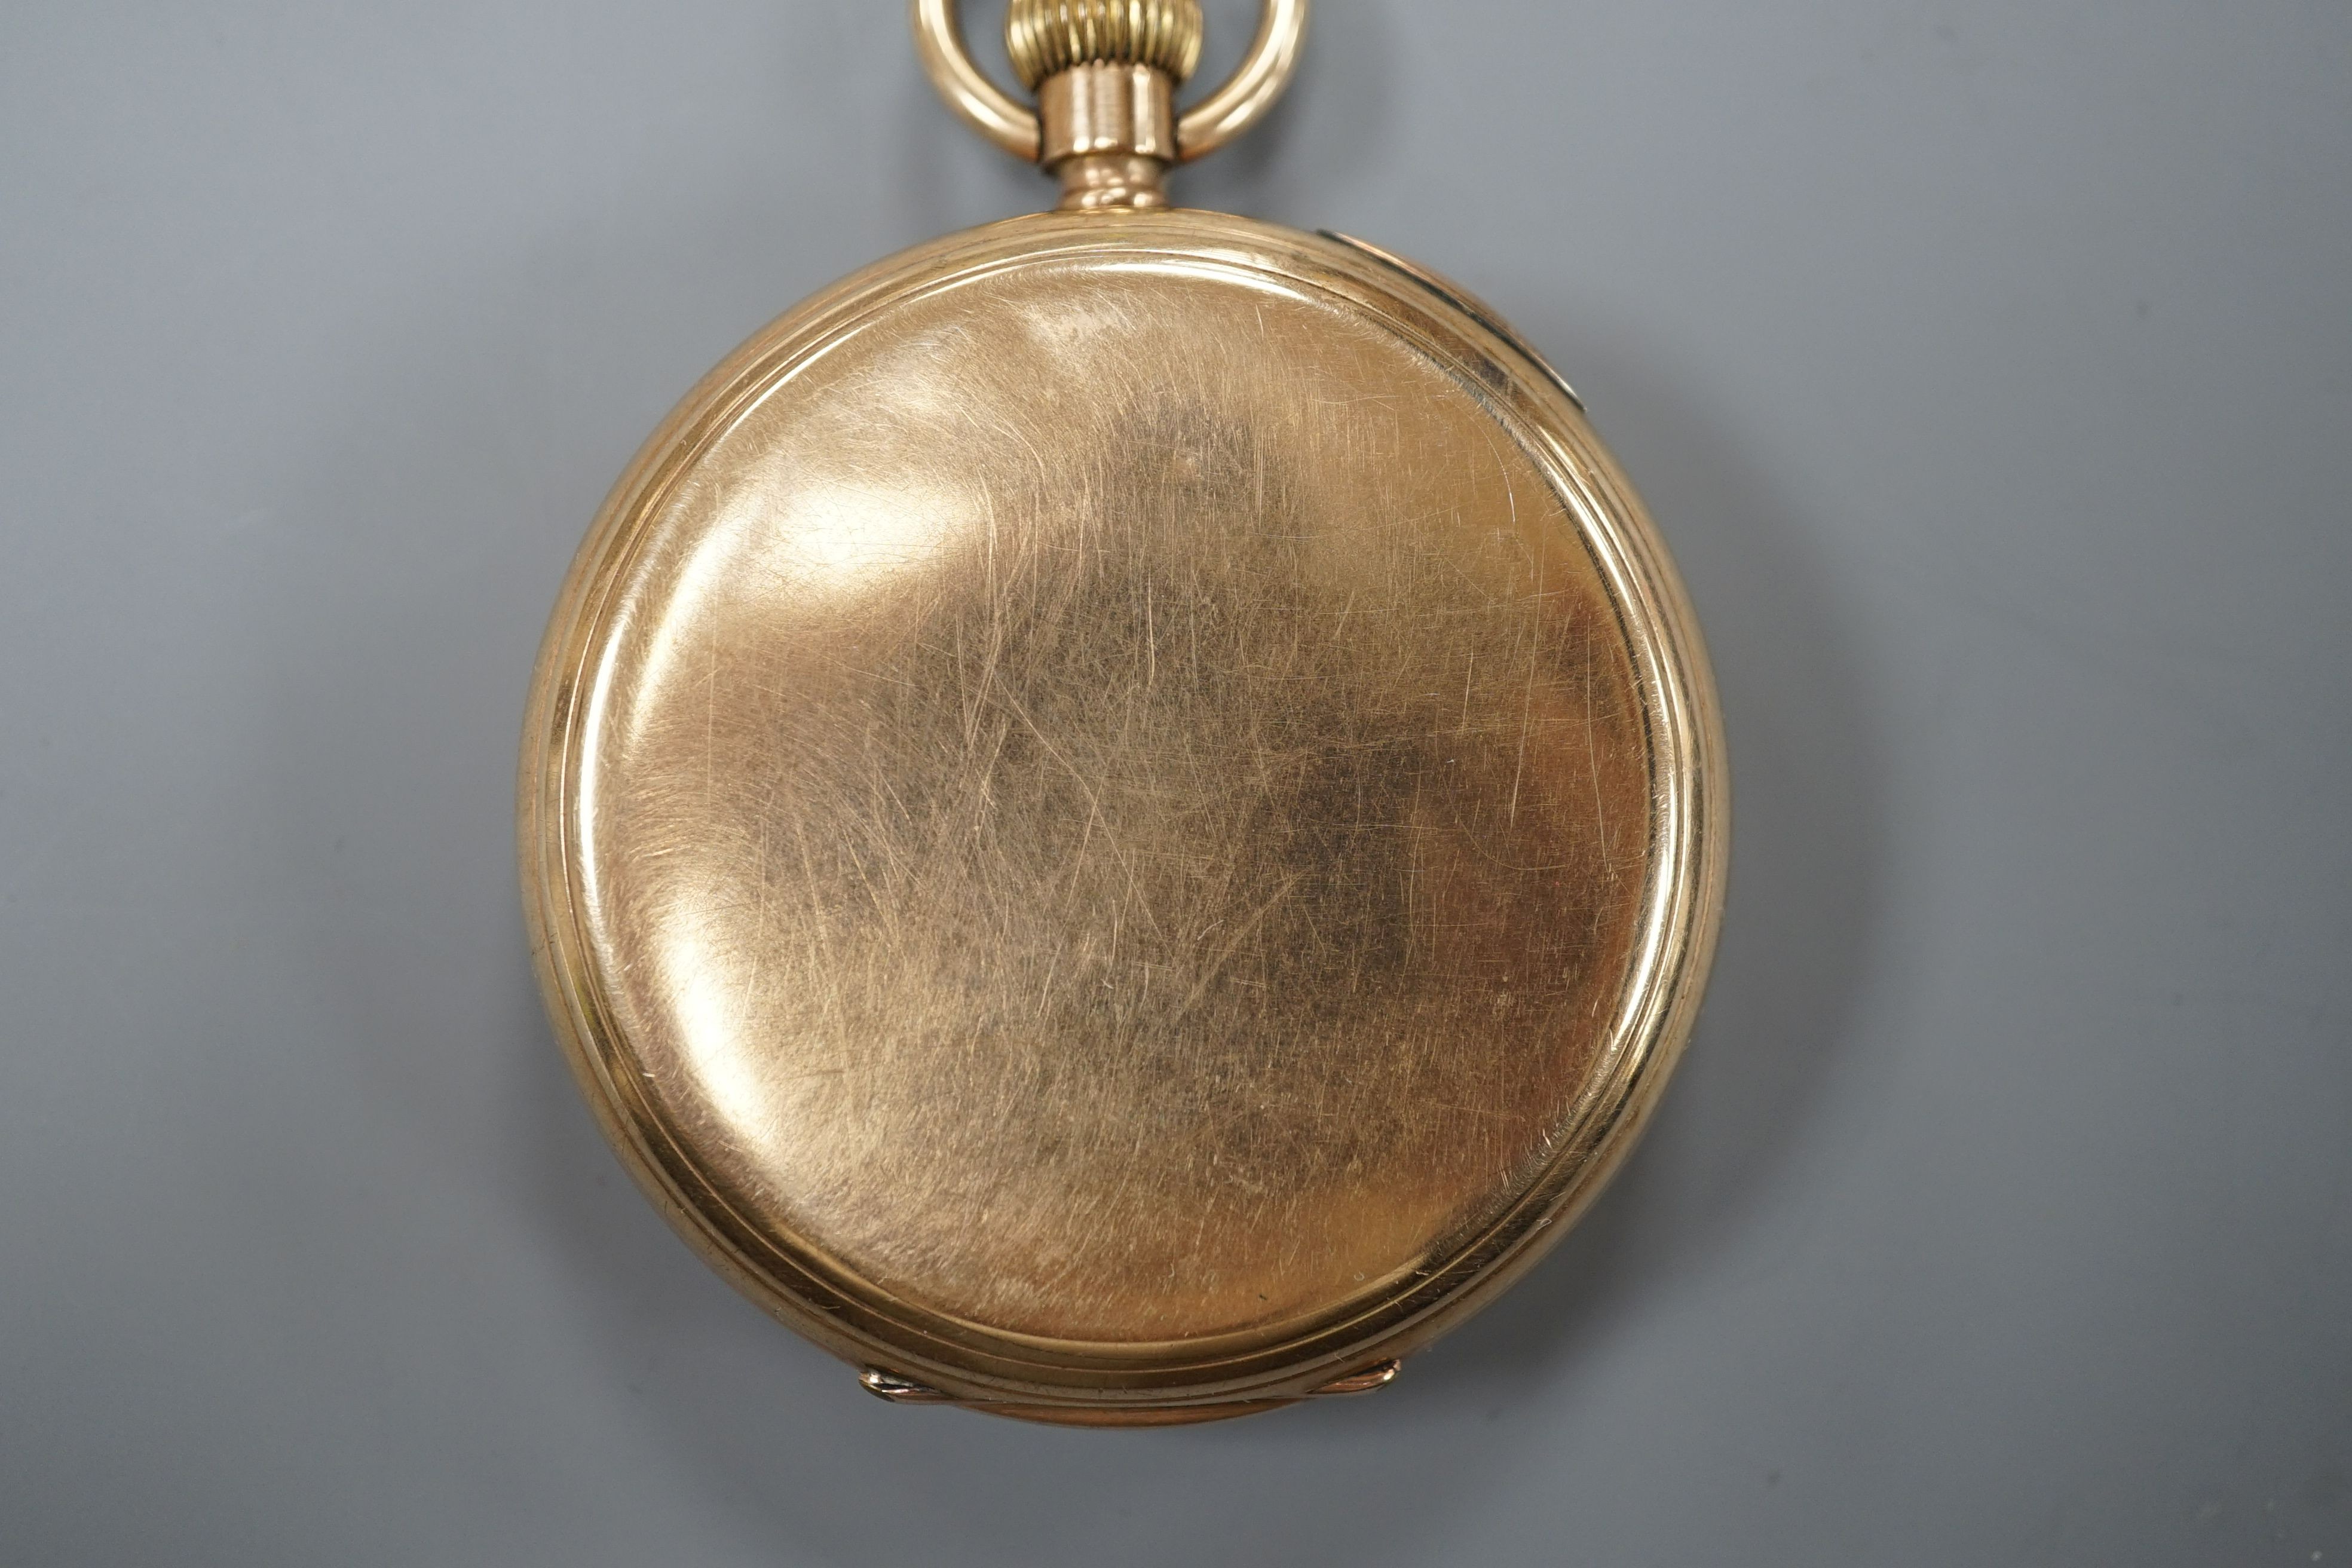 A 9ct gold Waltham keyless pocket watch, with enamelled Roman dial and subsidiary seconds, movement number 20221272, gross 122 grams.